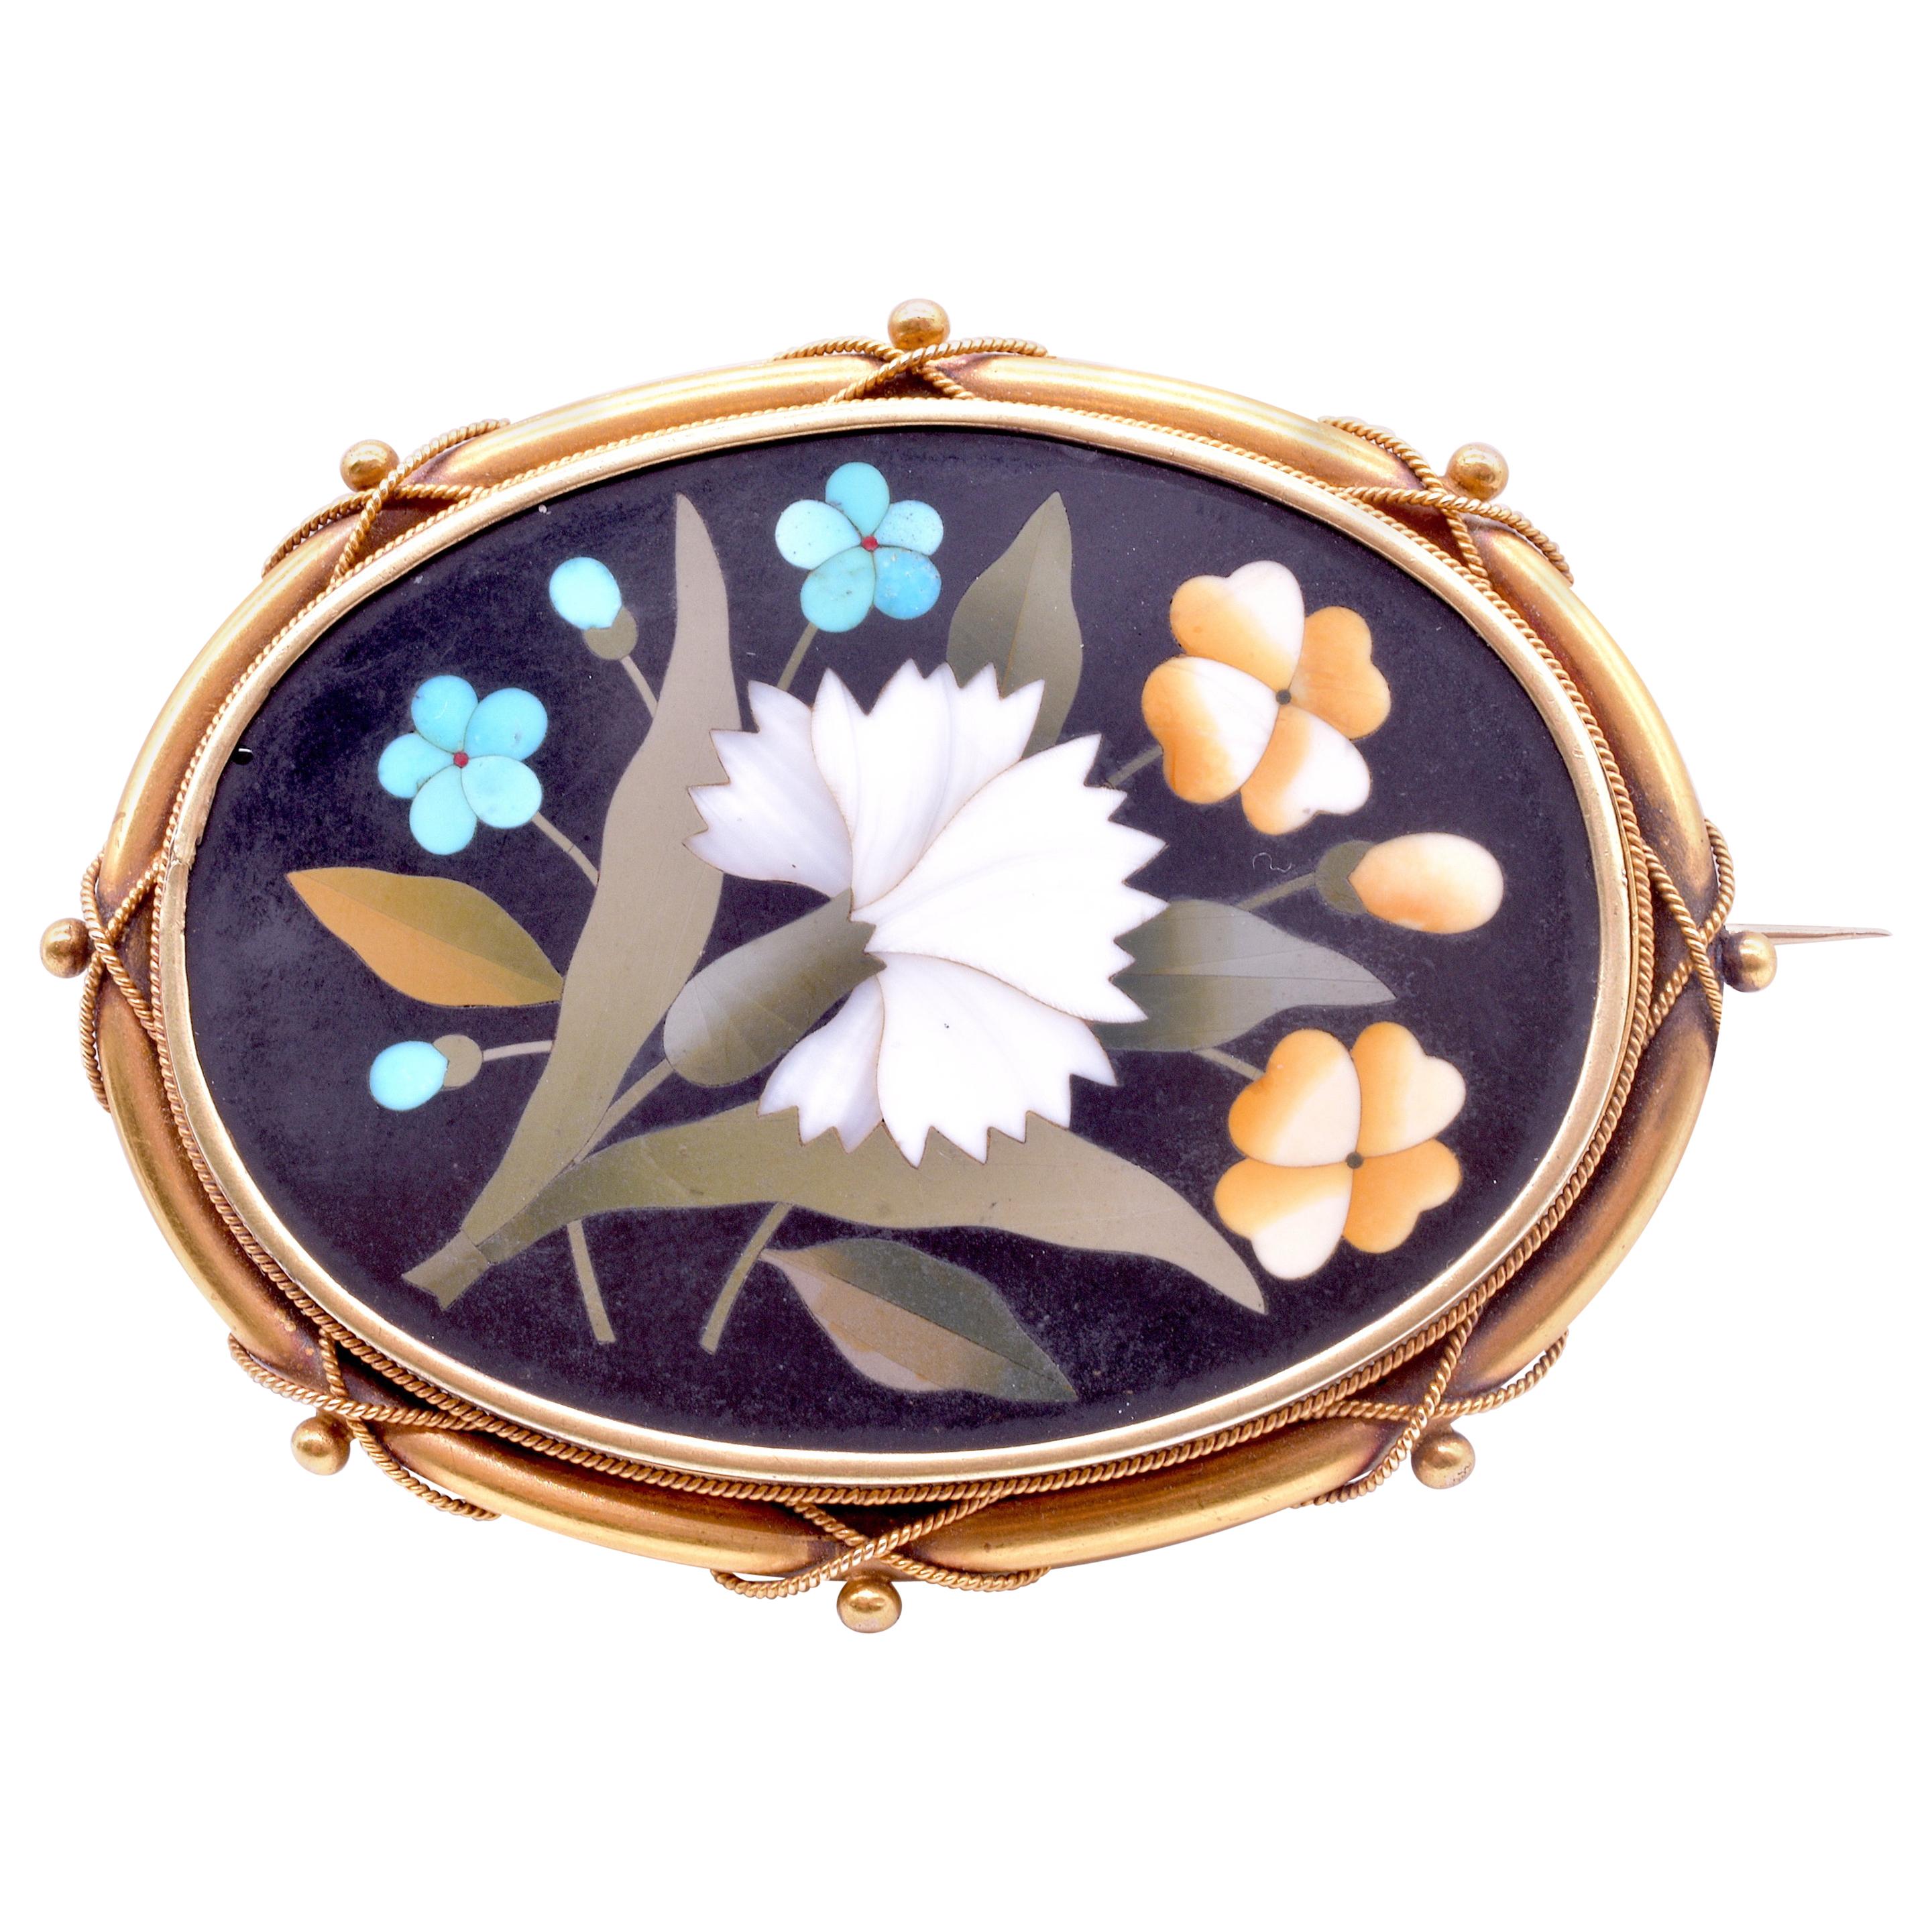 Antique 18 Carat Pietra-Dura Oval Flower Brooch with Gold Mount, c1860 For Sale